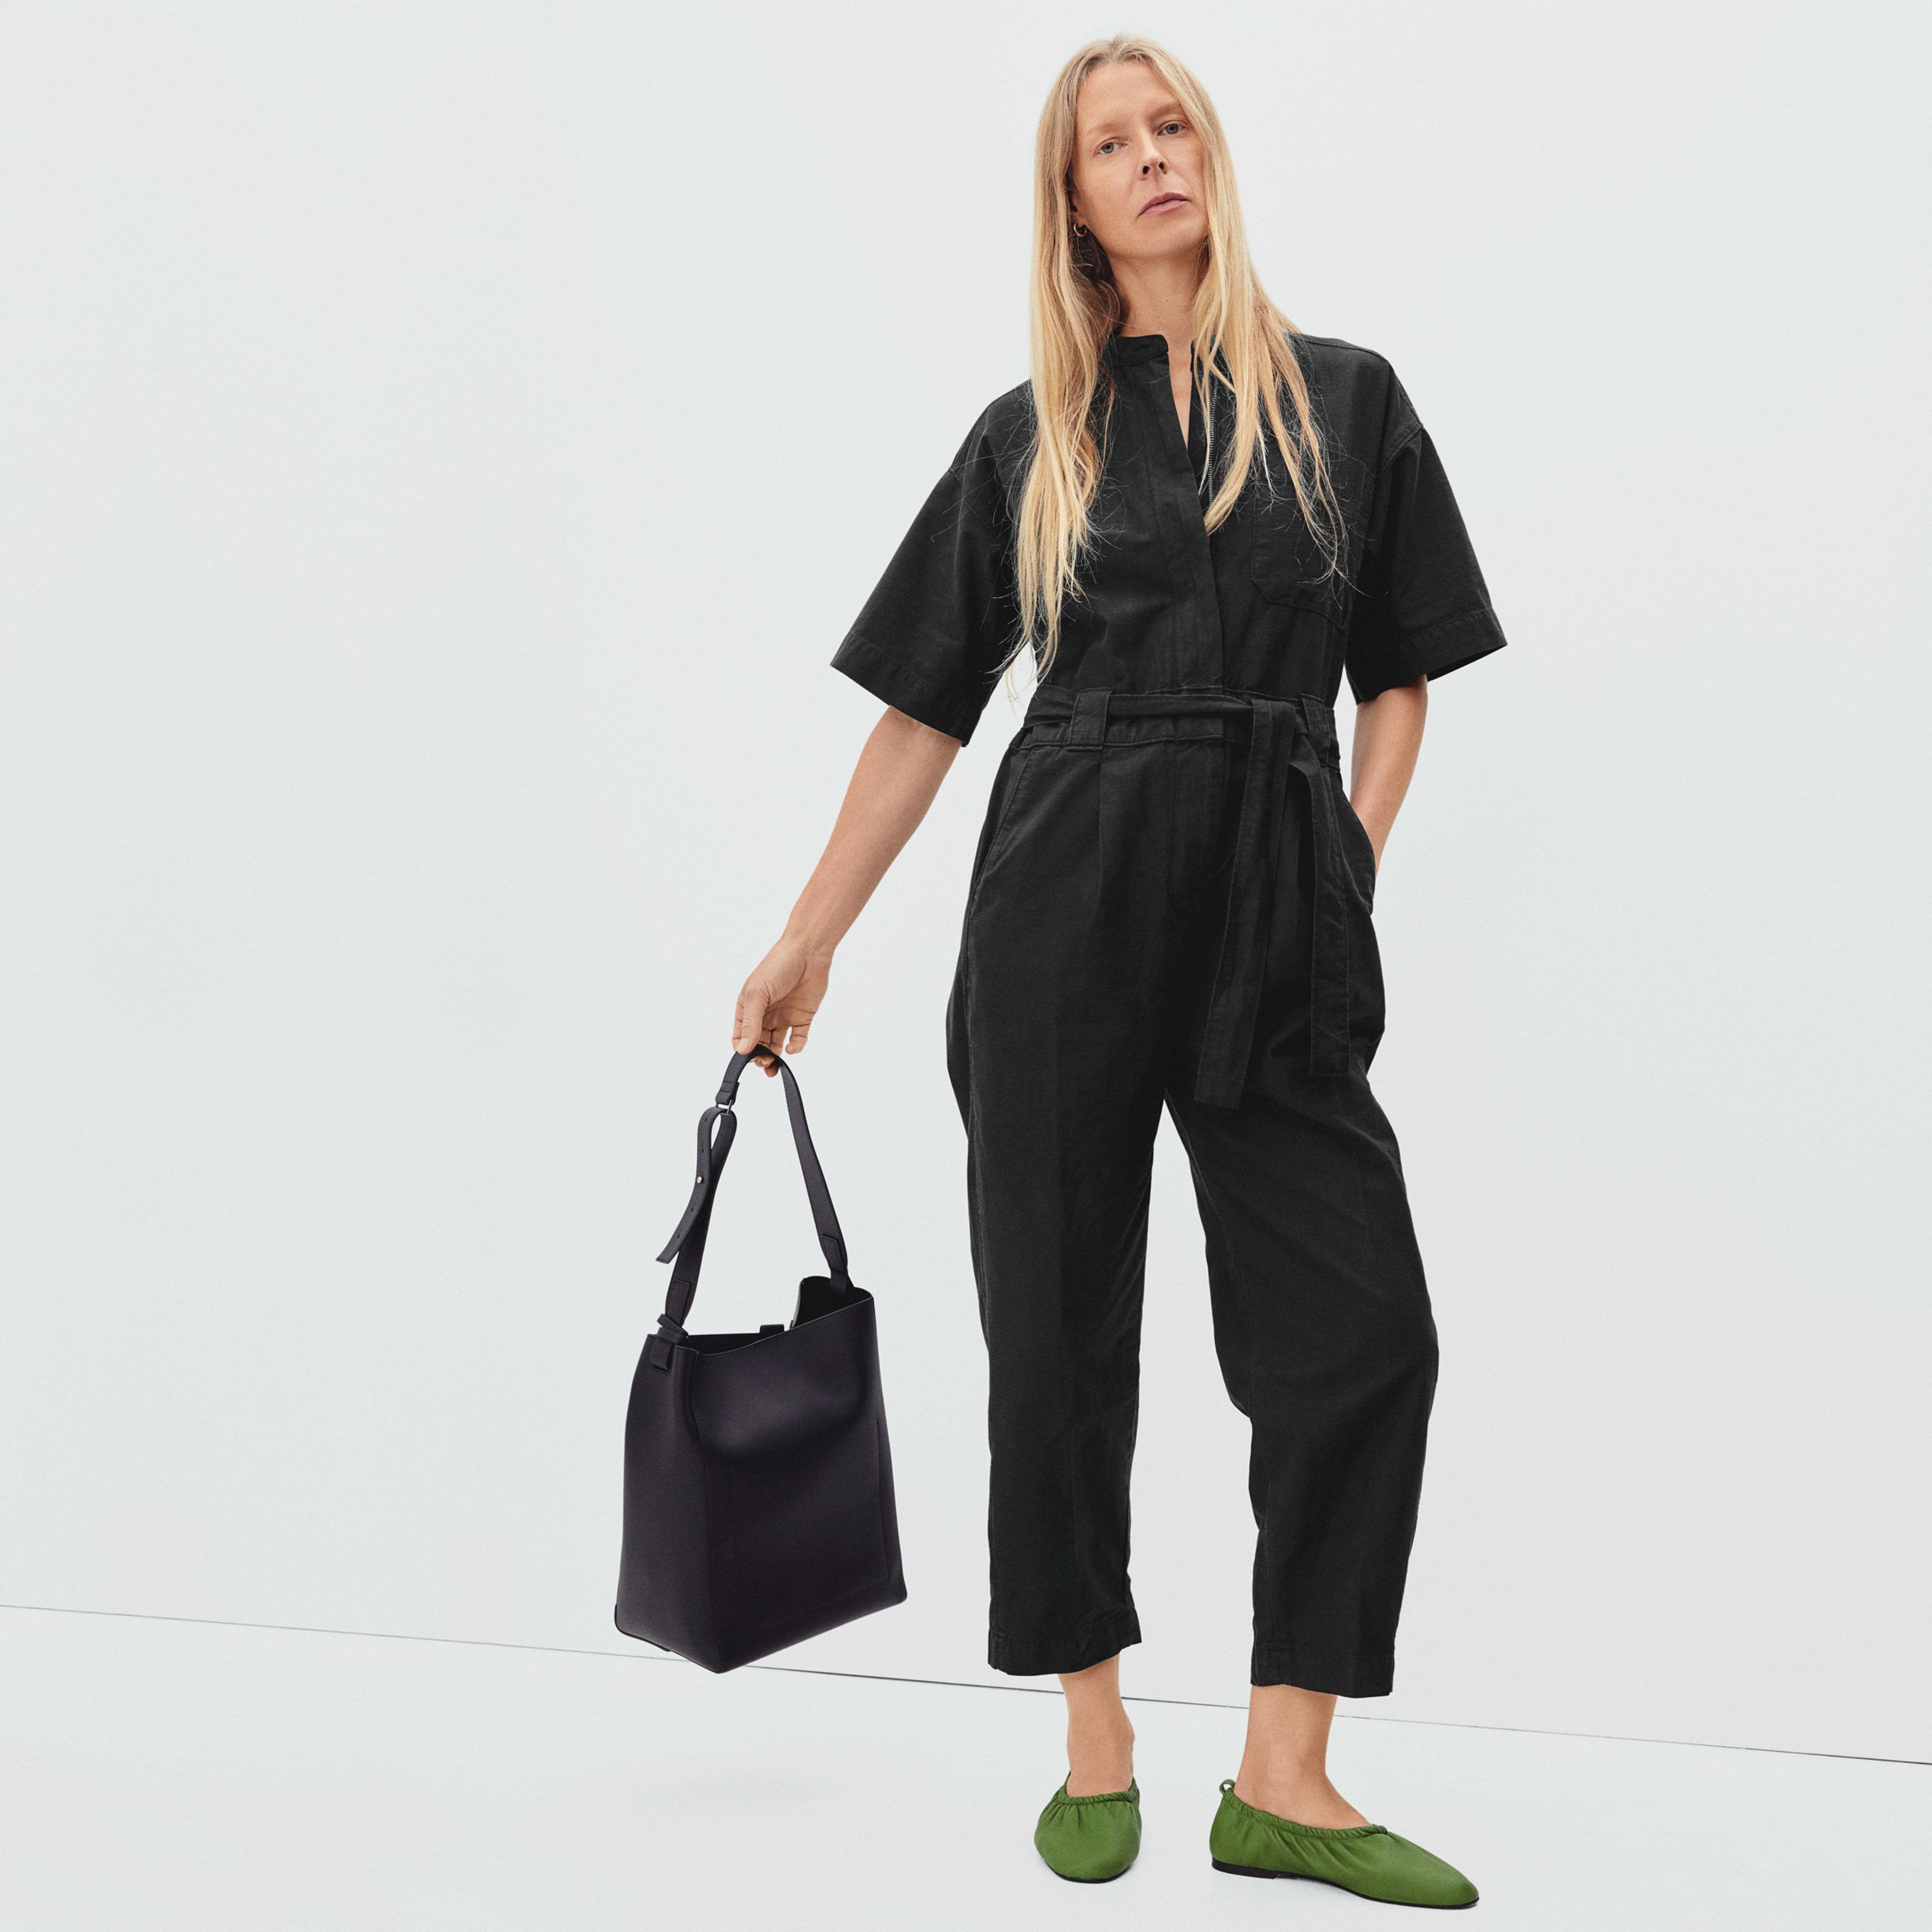 Women's Fatigue Short-Sleeve Jumpsuit by Everlane in Black, Size 6 | Everlane